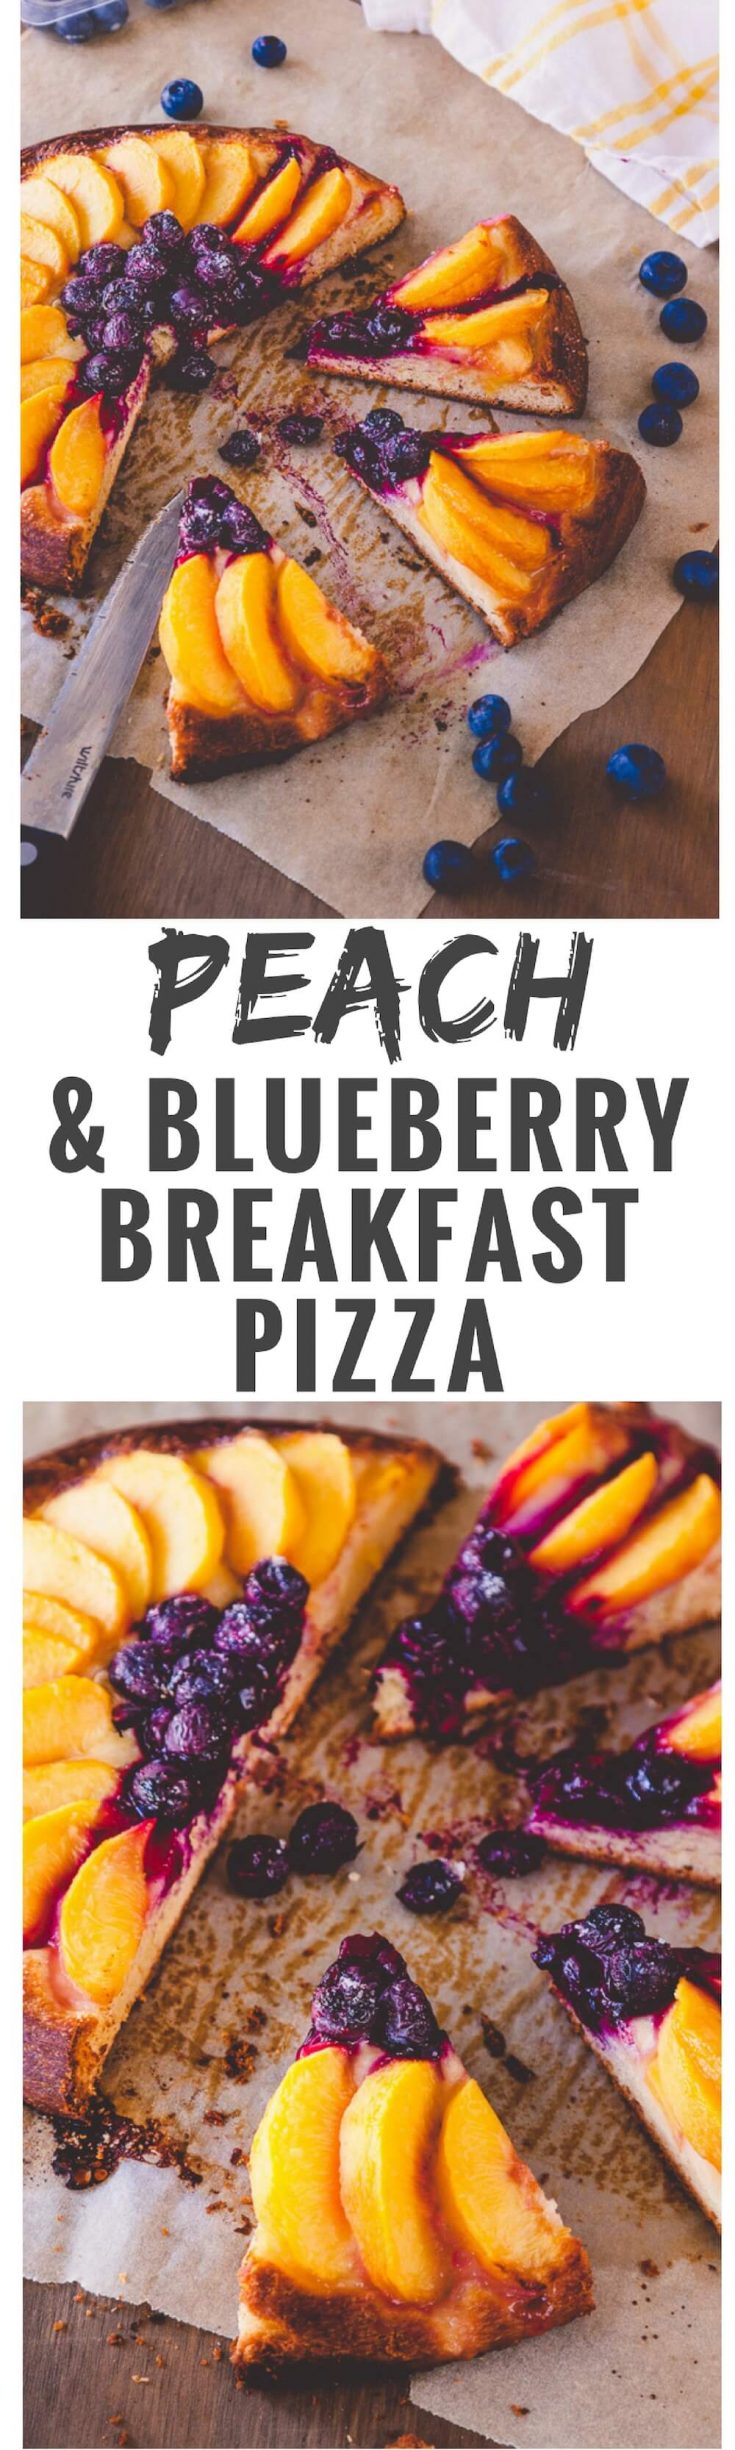 Peach and Blueberry Breakfast Pizza Recipe | Delicious Everyday